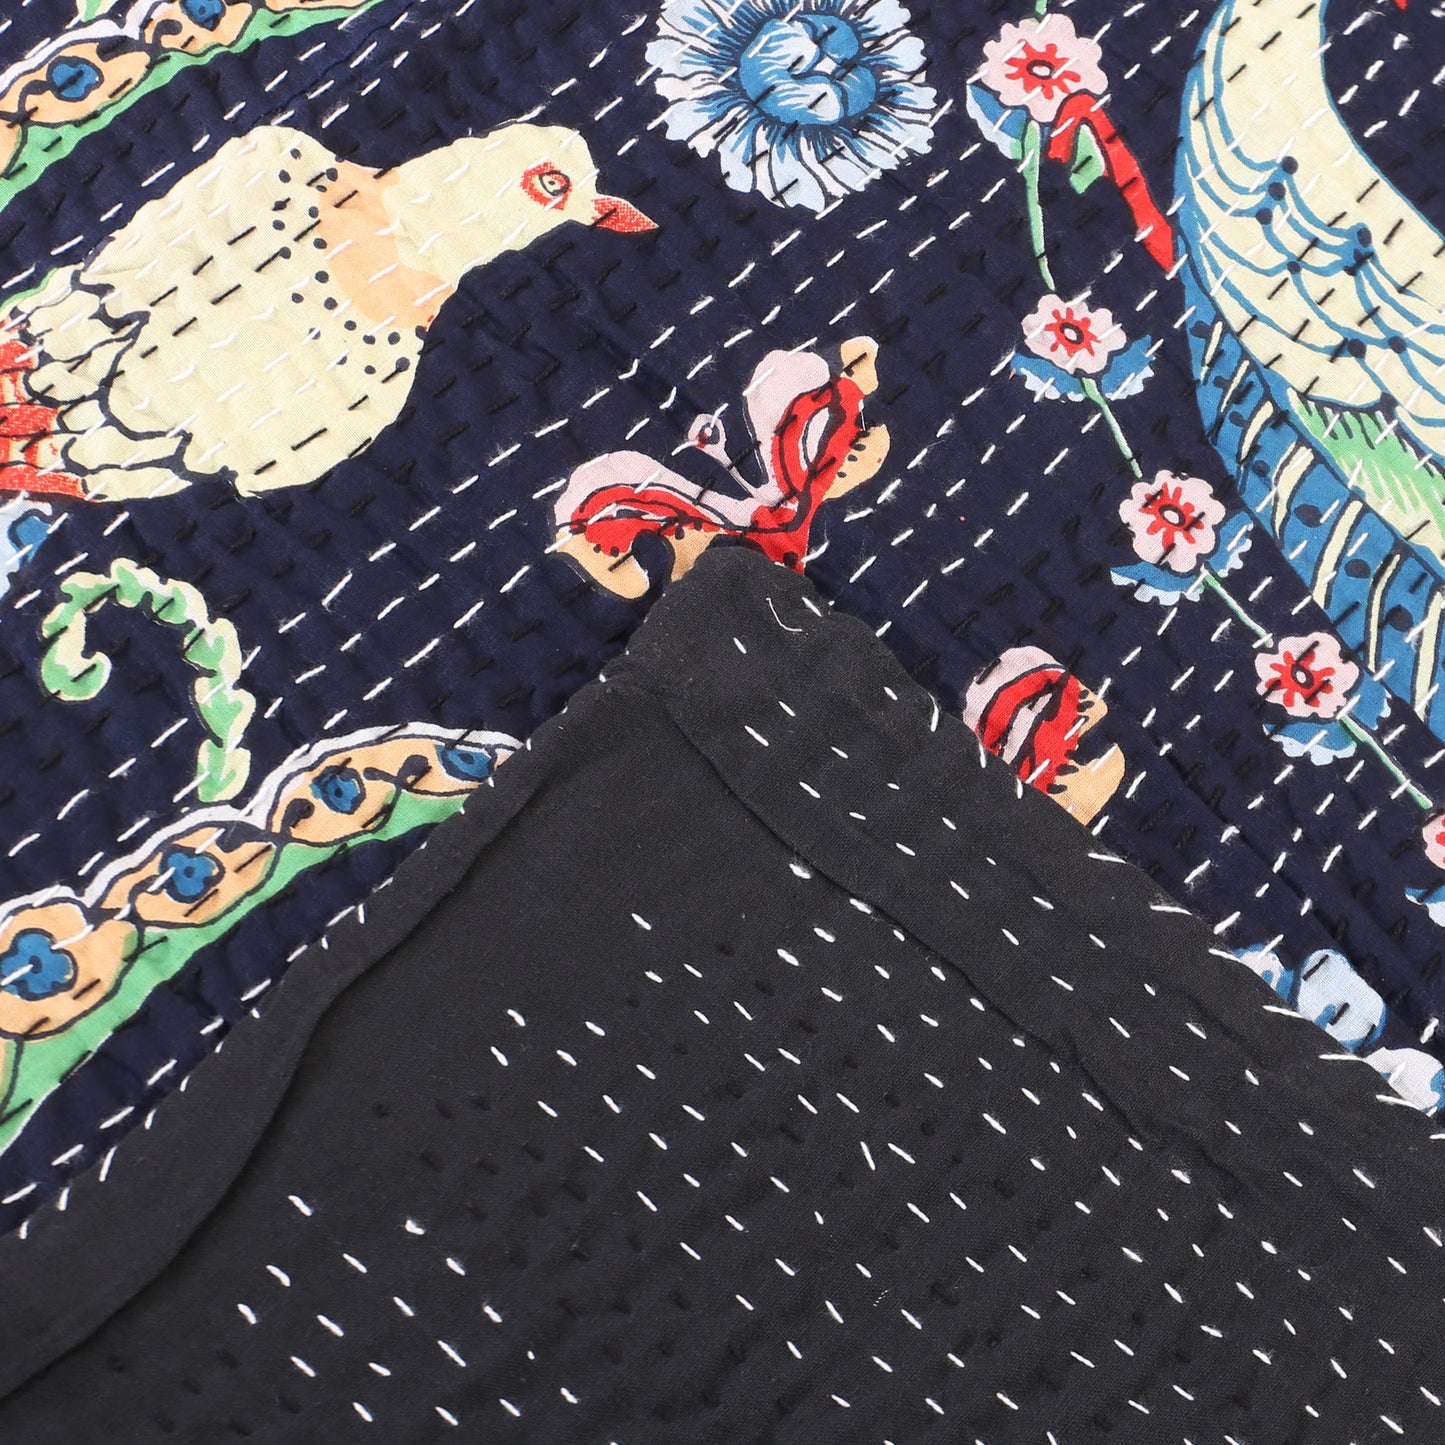 Hand Quilted Kantha Bedcover-Midnight Gospel Black